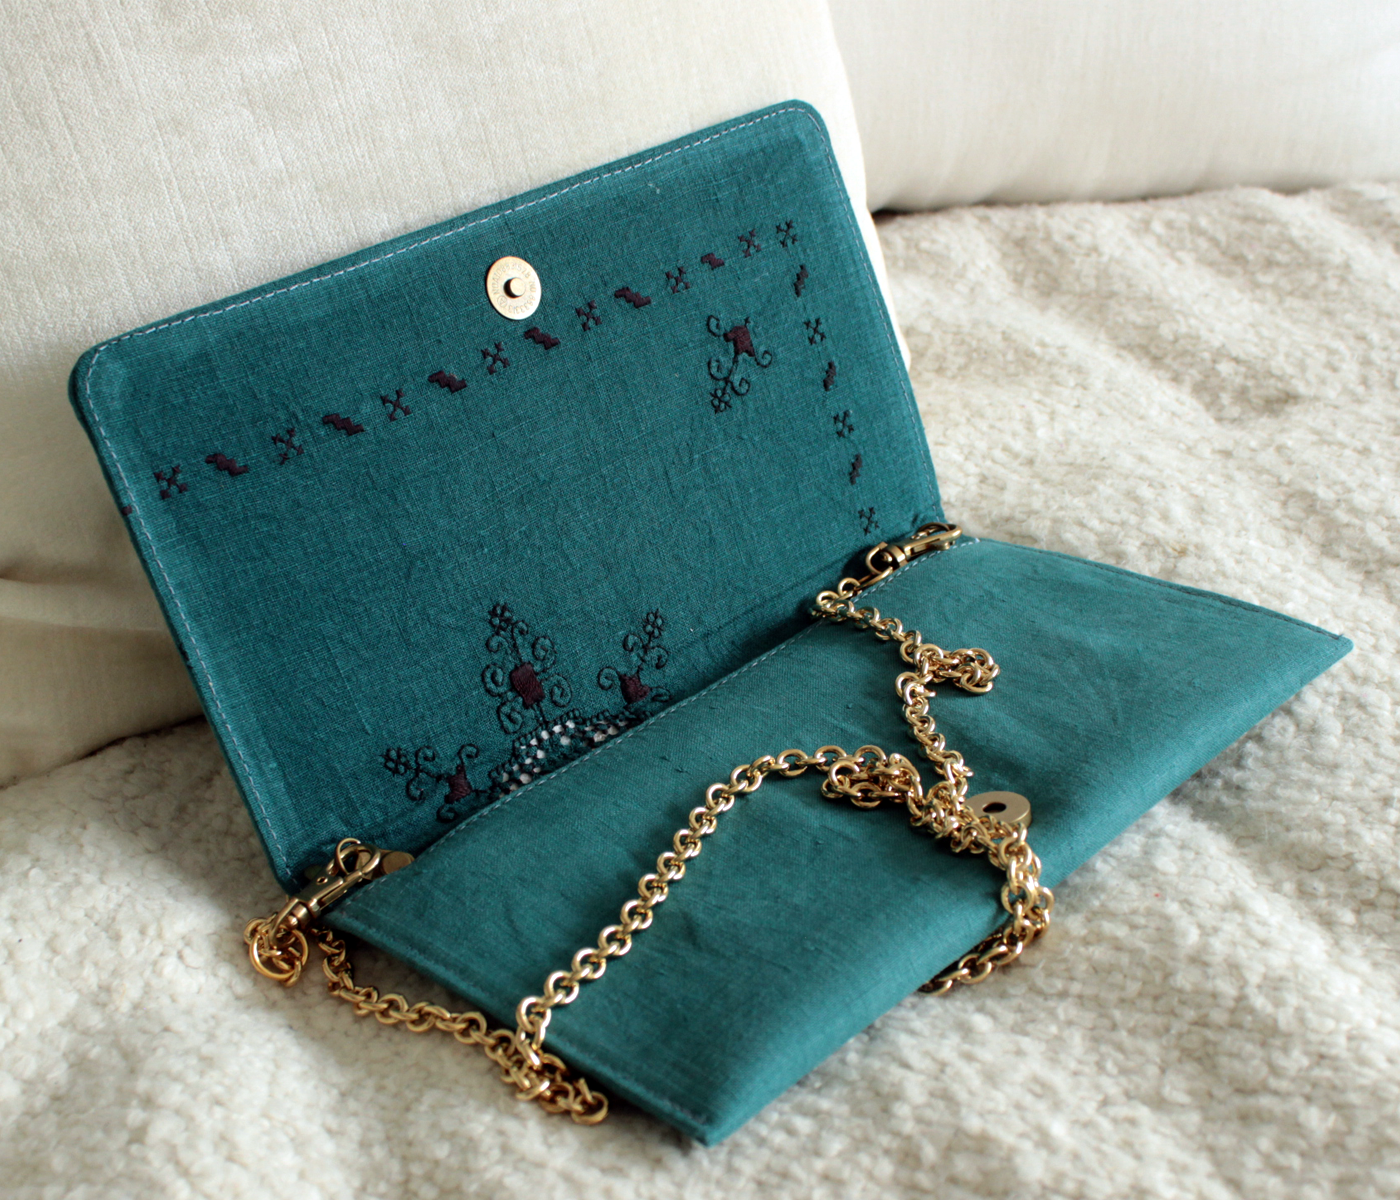 Handmade Emerald Green Clutch with Antique Embroidered Napkin